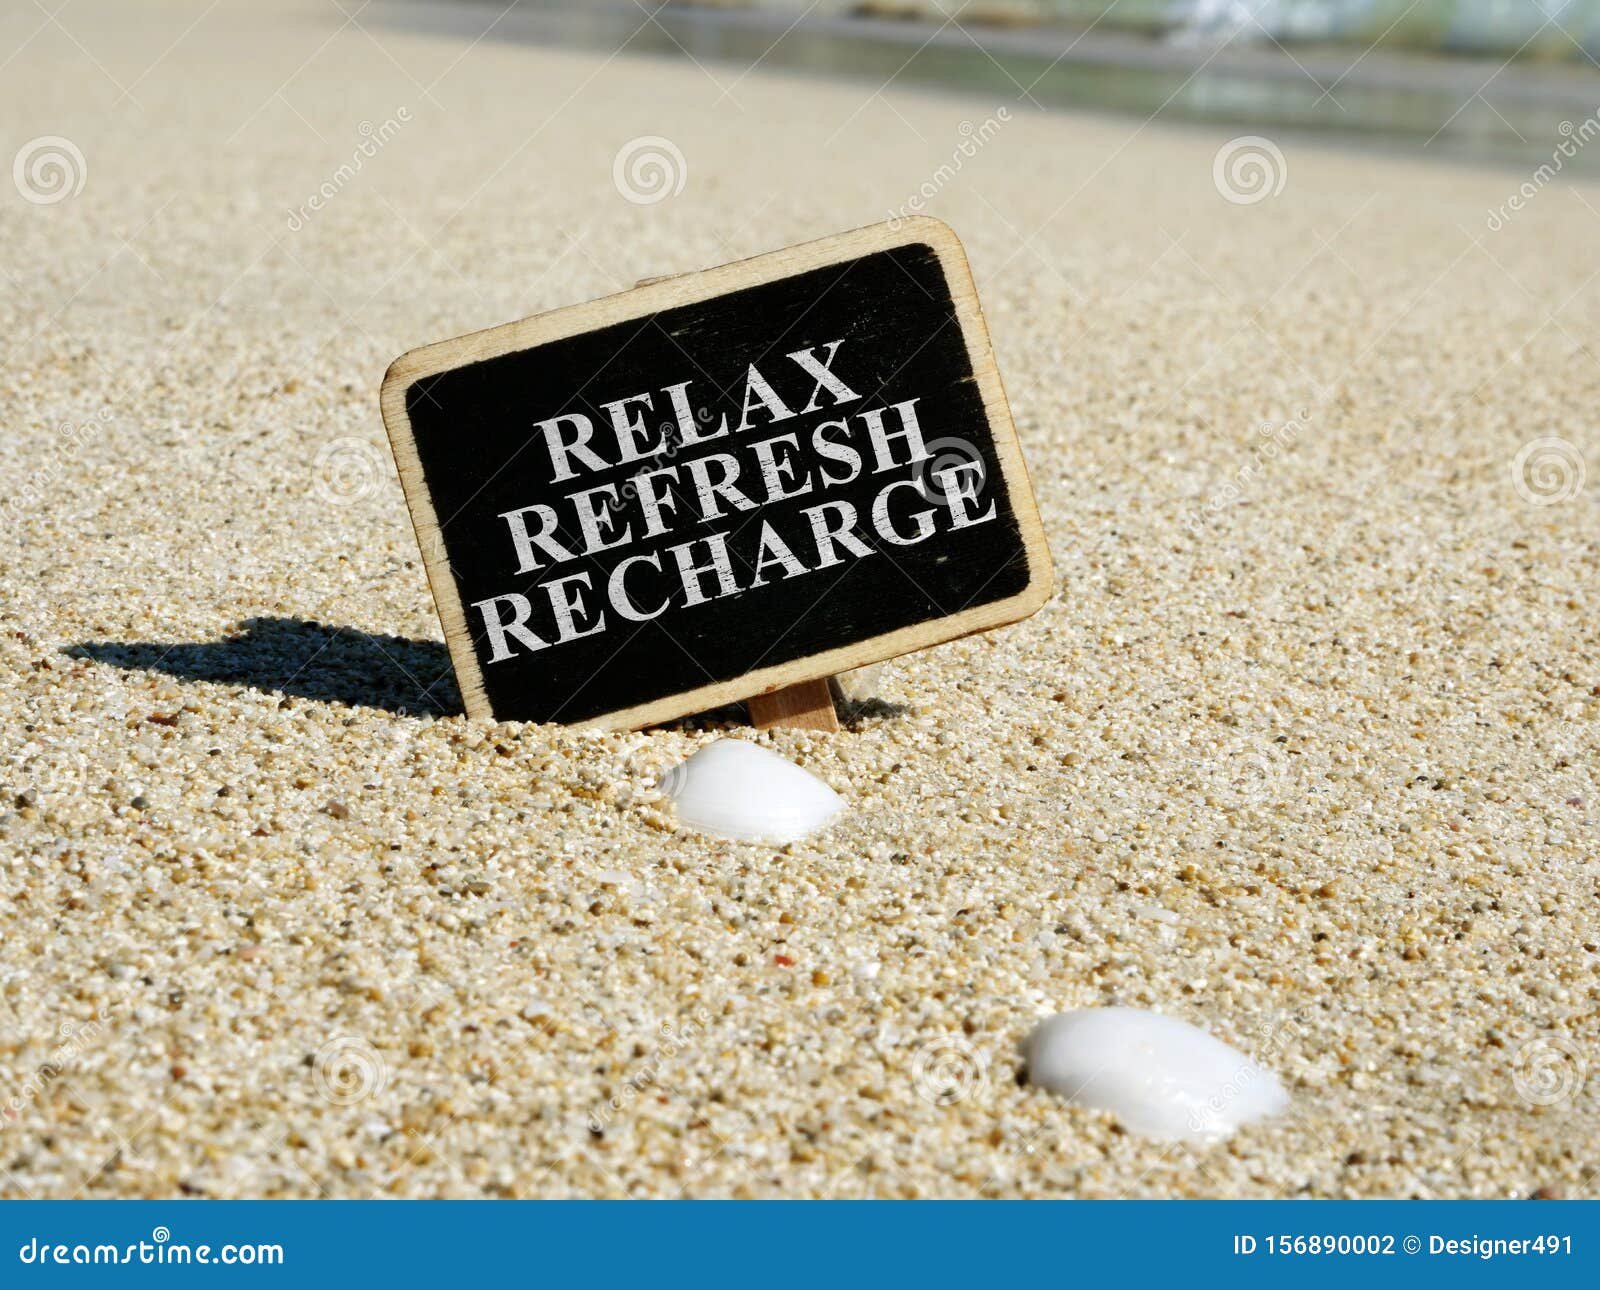 relax refresh recharge sign